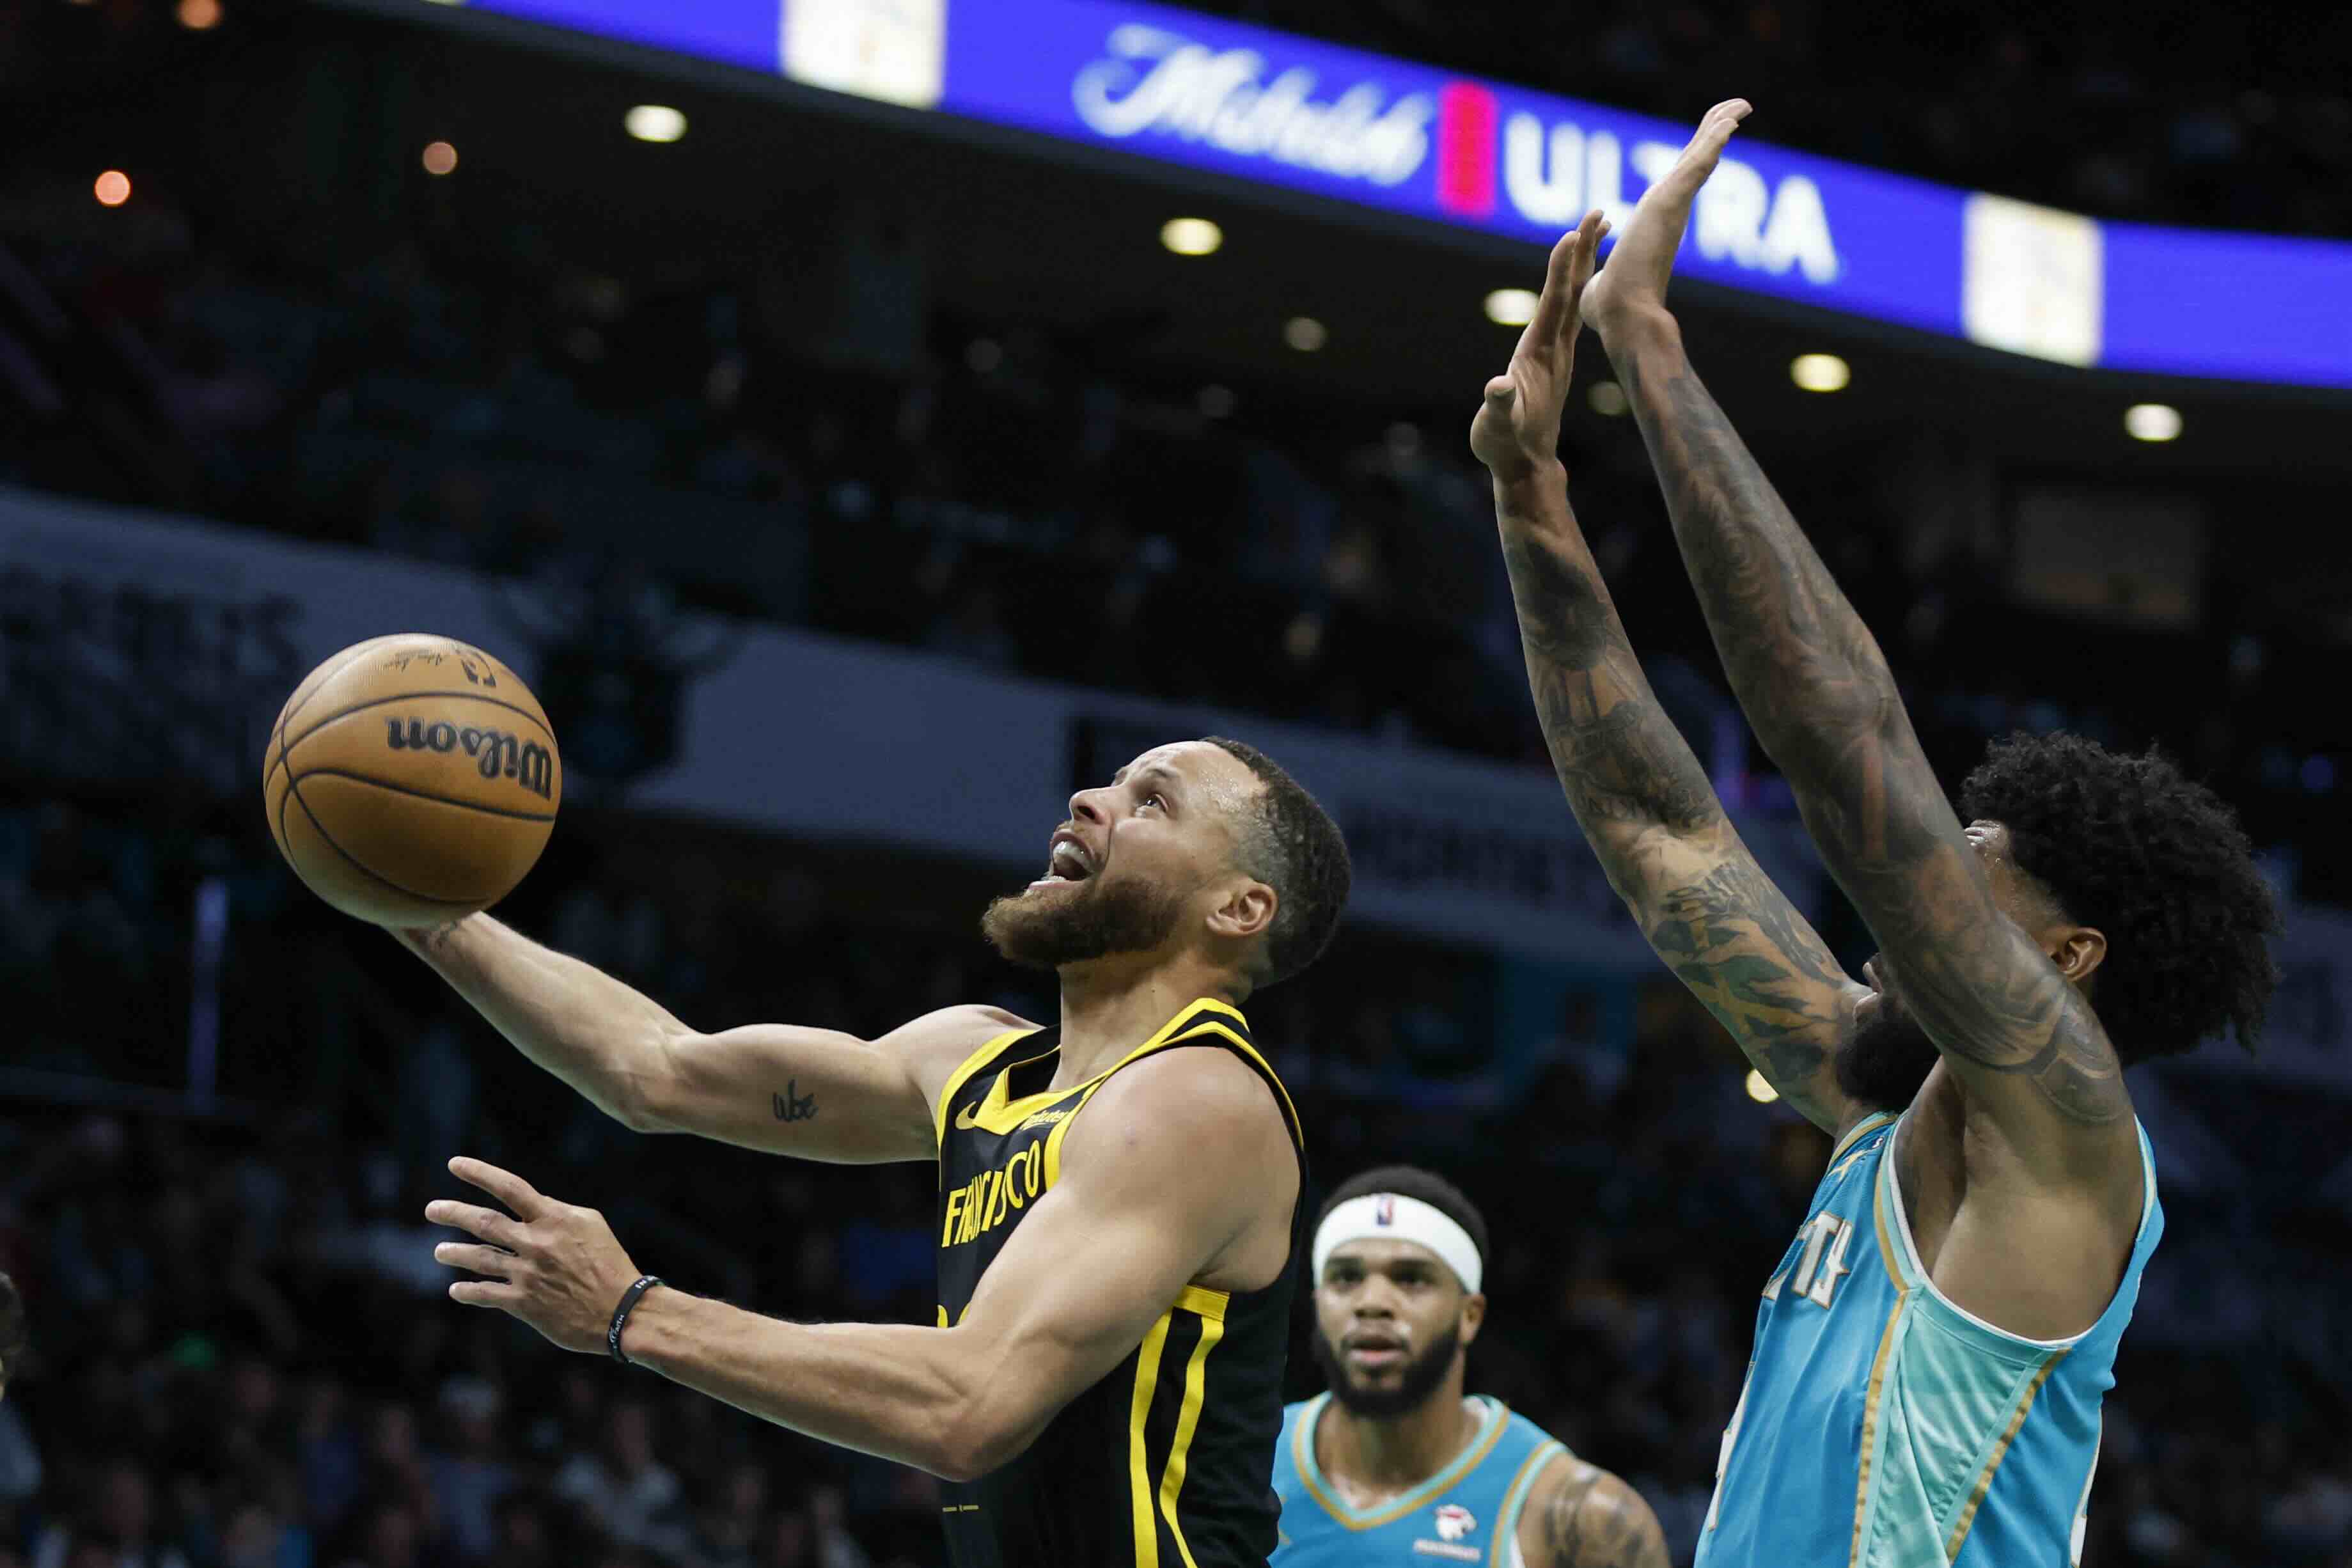 Stephen Curry scored 23 points in a return to his hometown as the visiting Golden State Warriors beat the Charlotte Hornets 115-97 